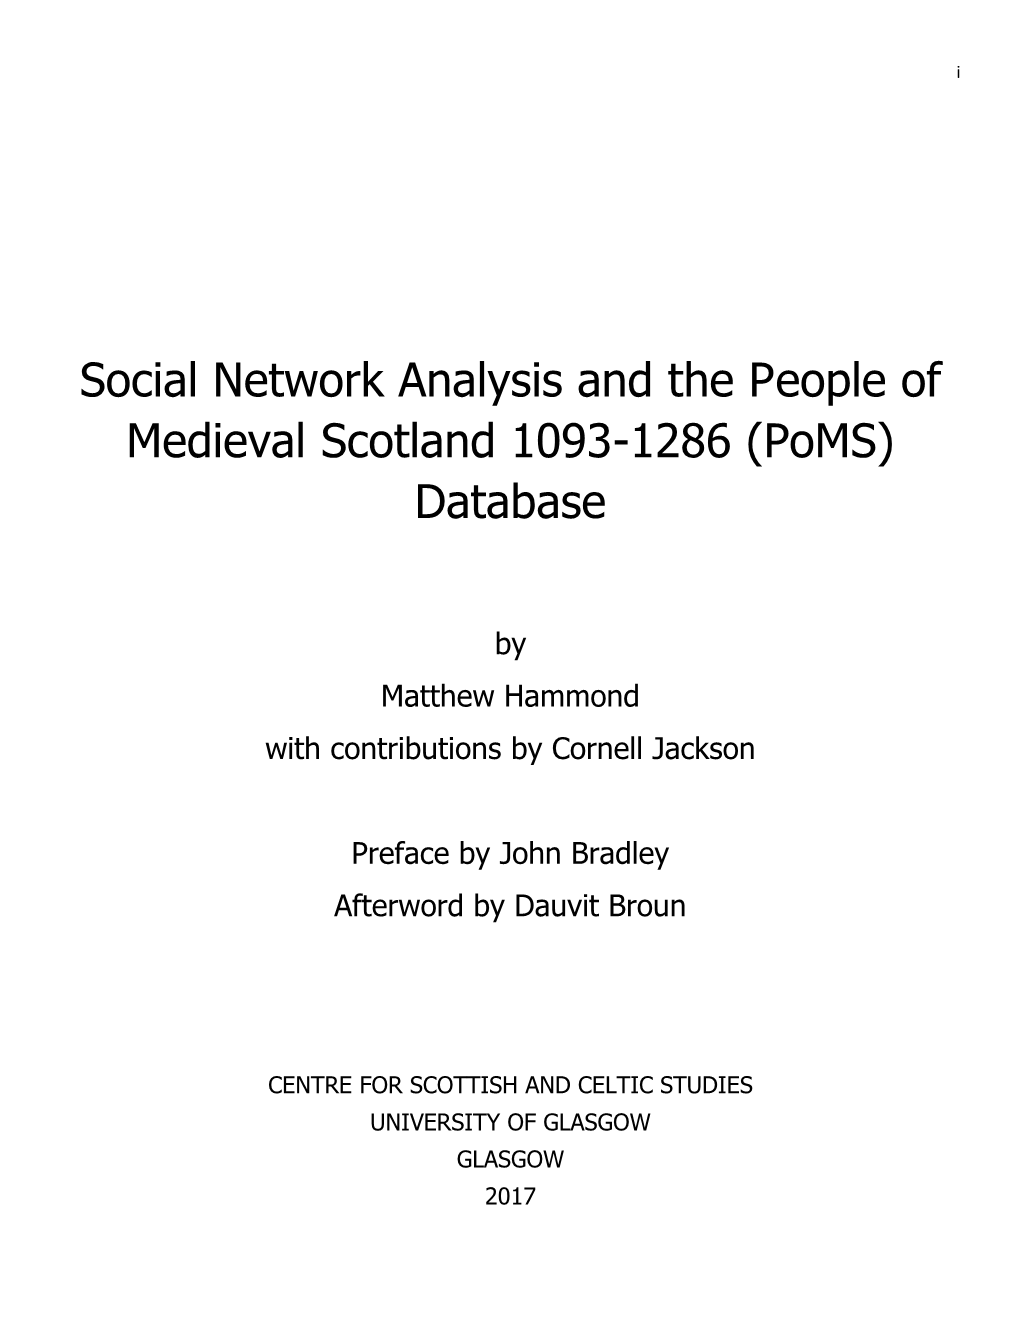 Social Network Analysis and the People of Medieval Scotland 1093-1286 (Poms) Database